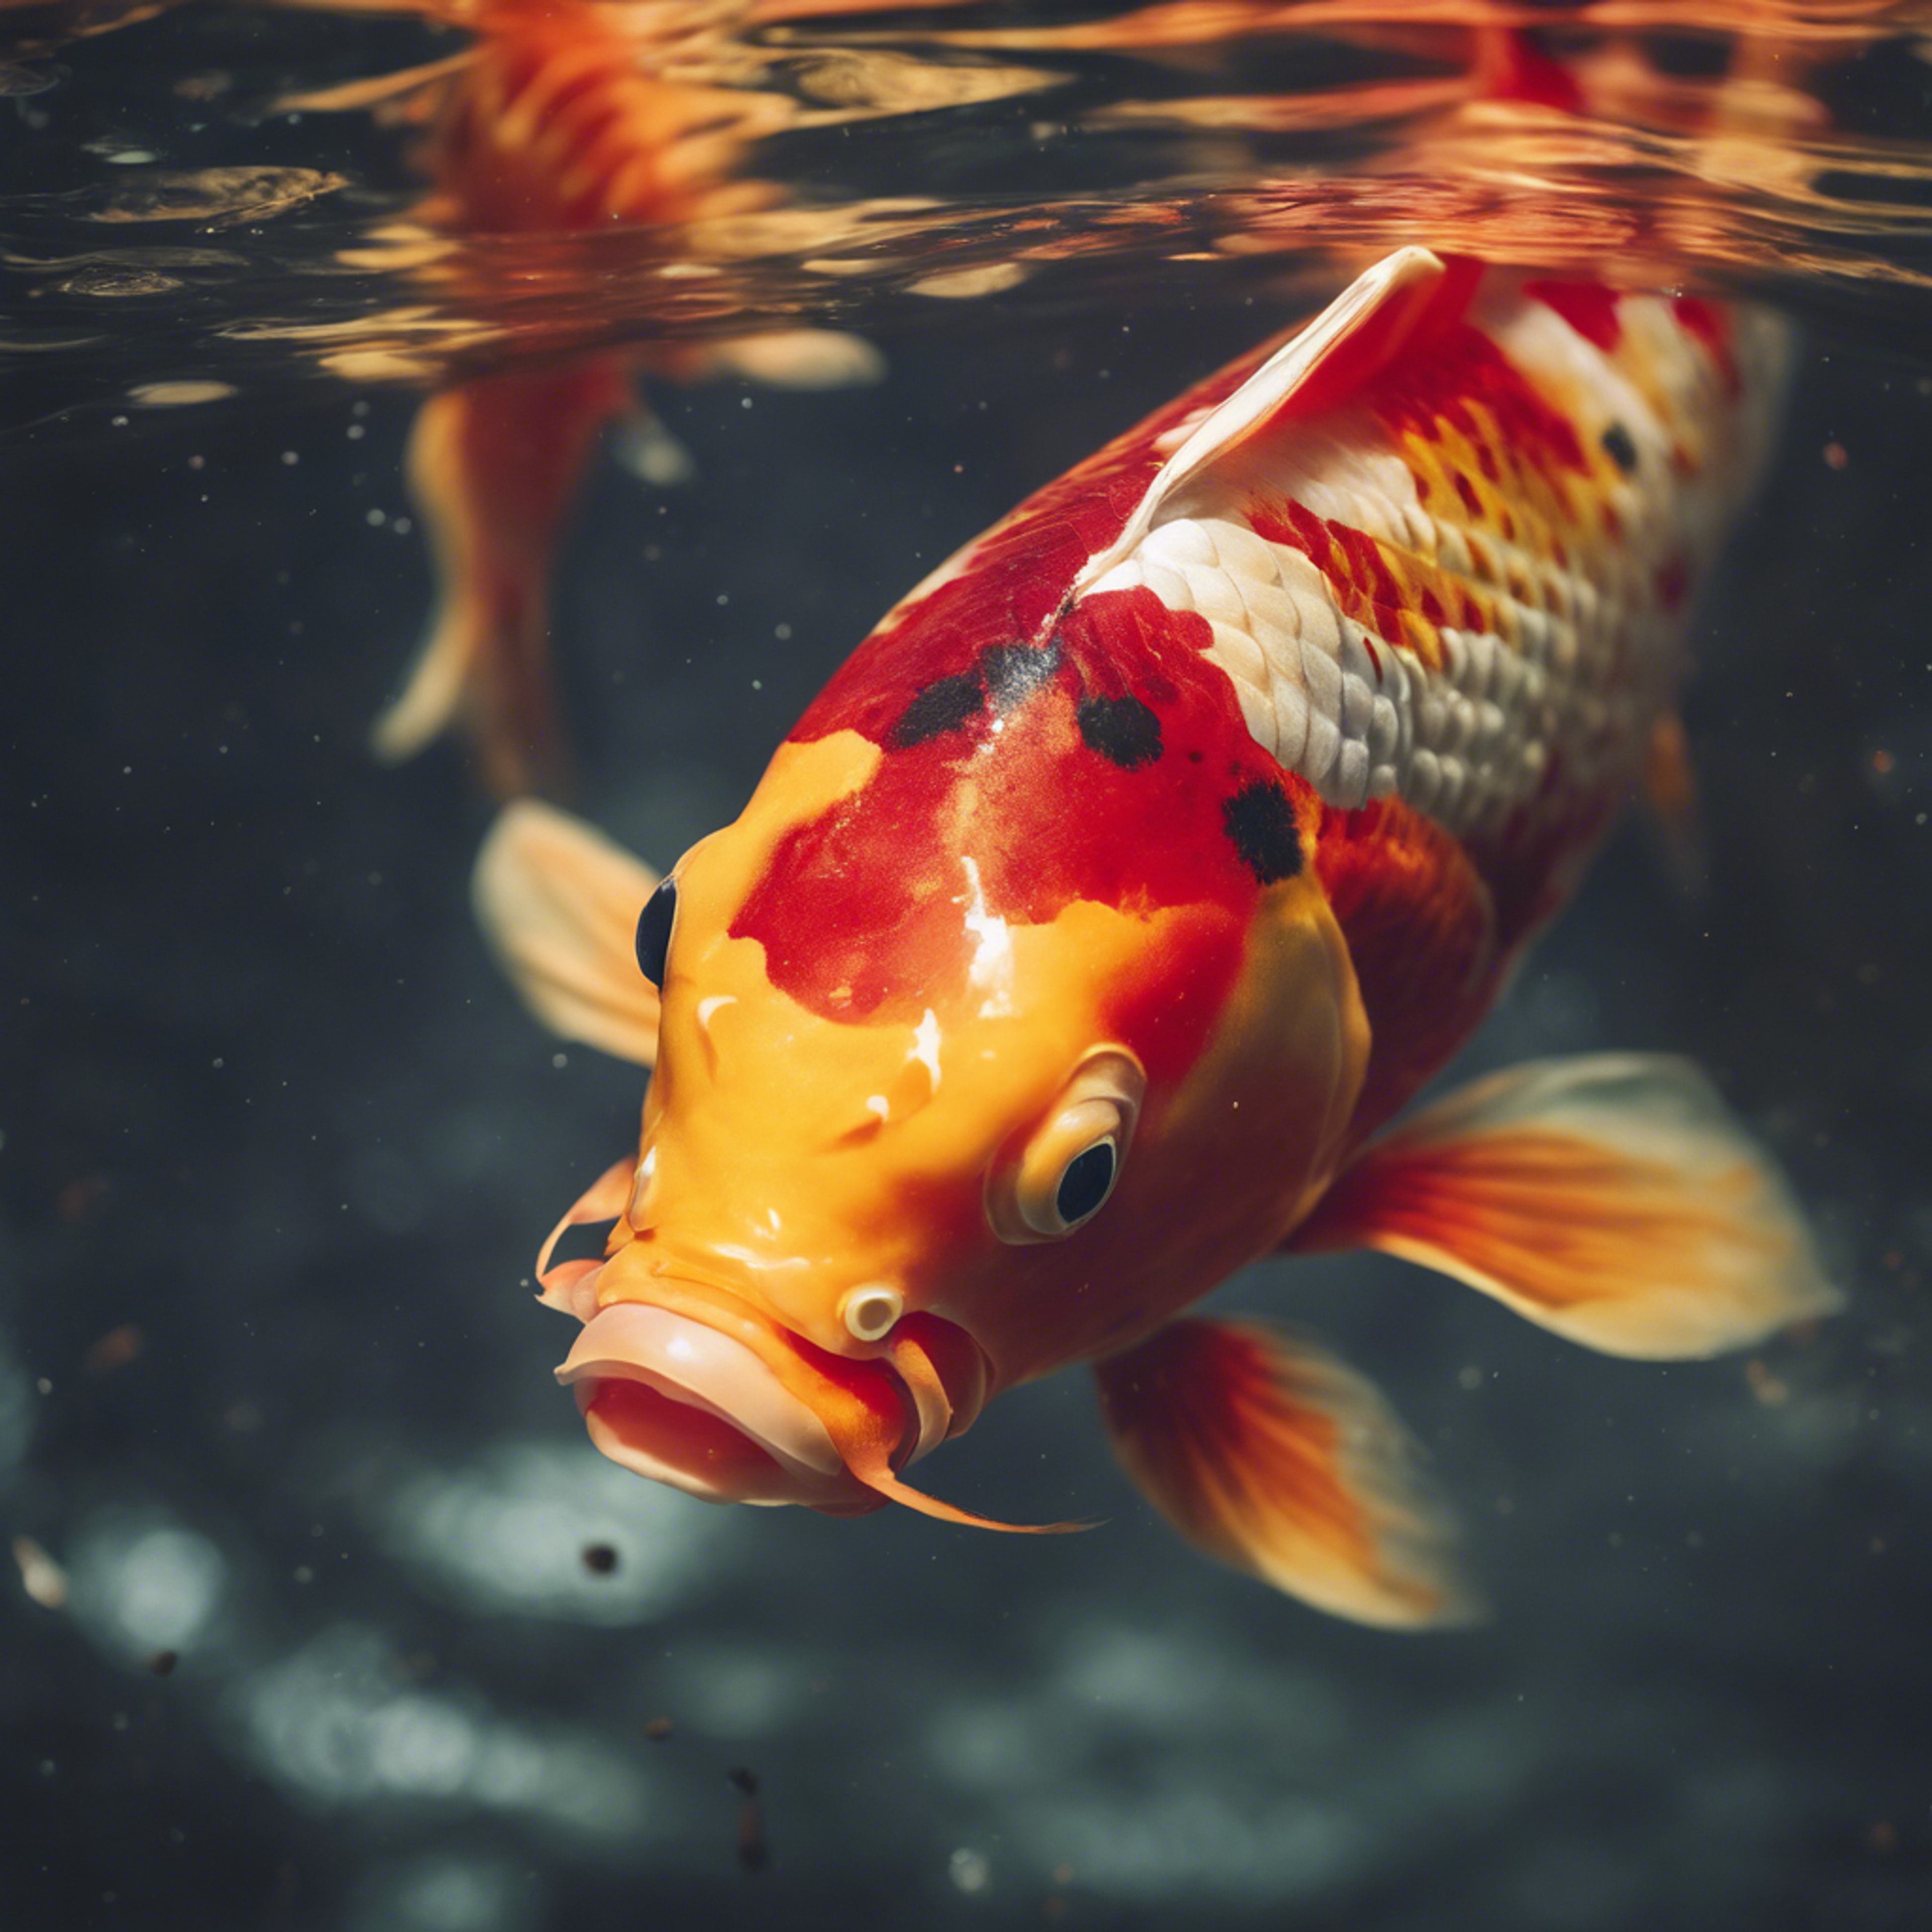 A vibrant red and gold koi fish swimming in a clear pond. Дэлгэцийн зураг[1dfeb98f60cb429caecb]